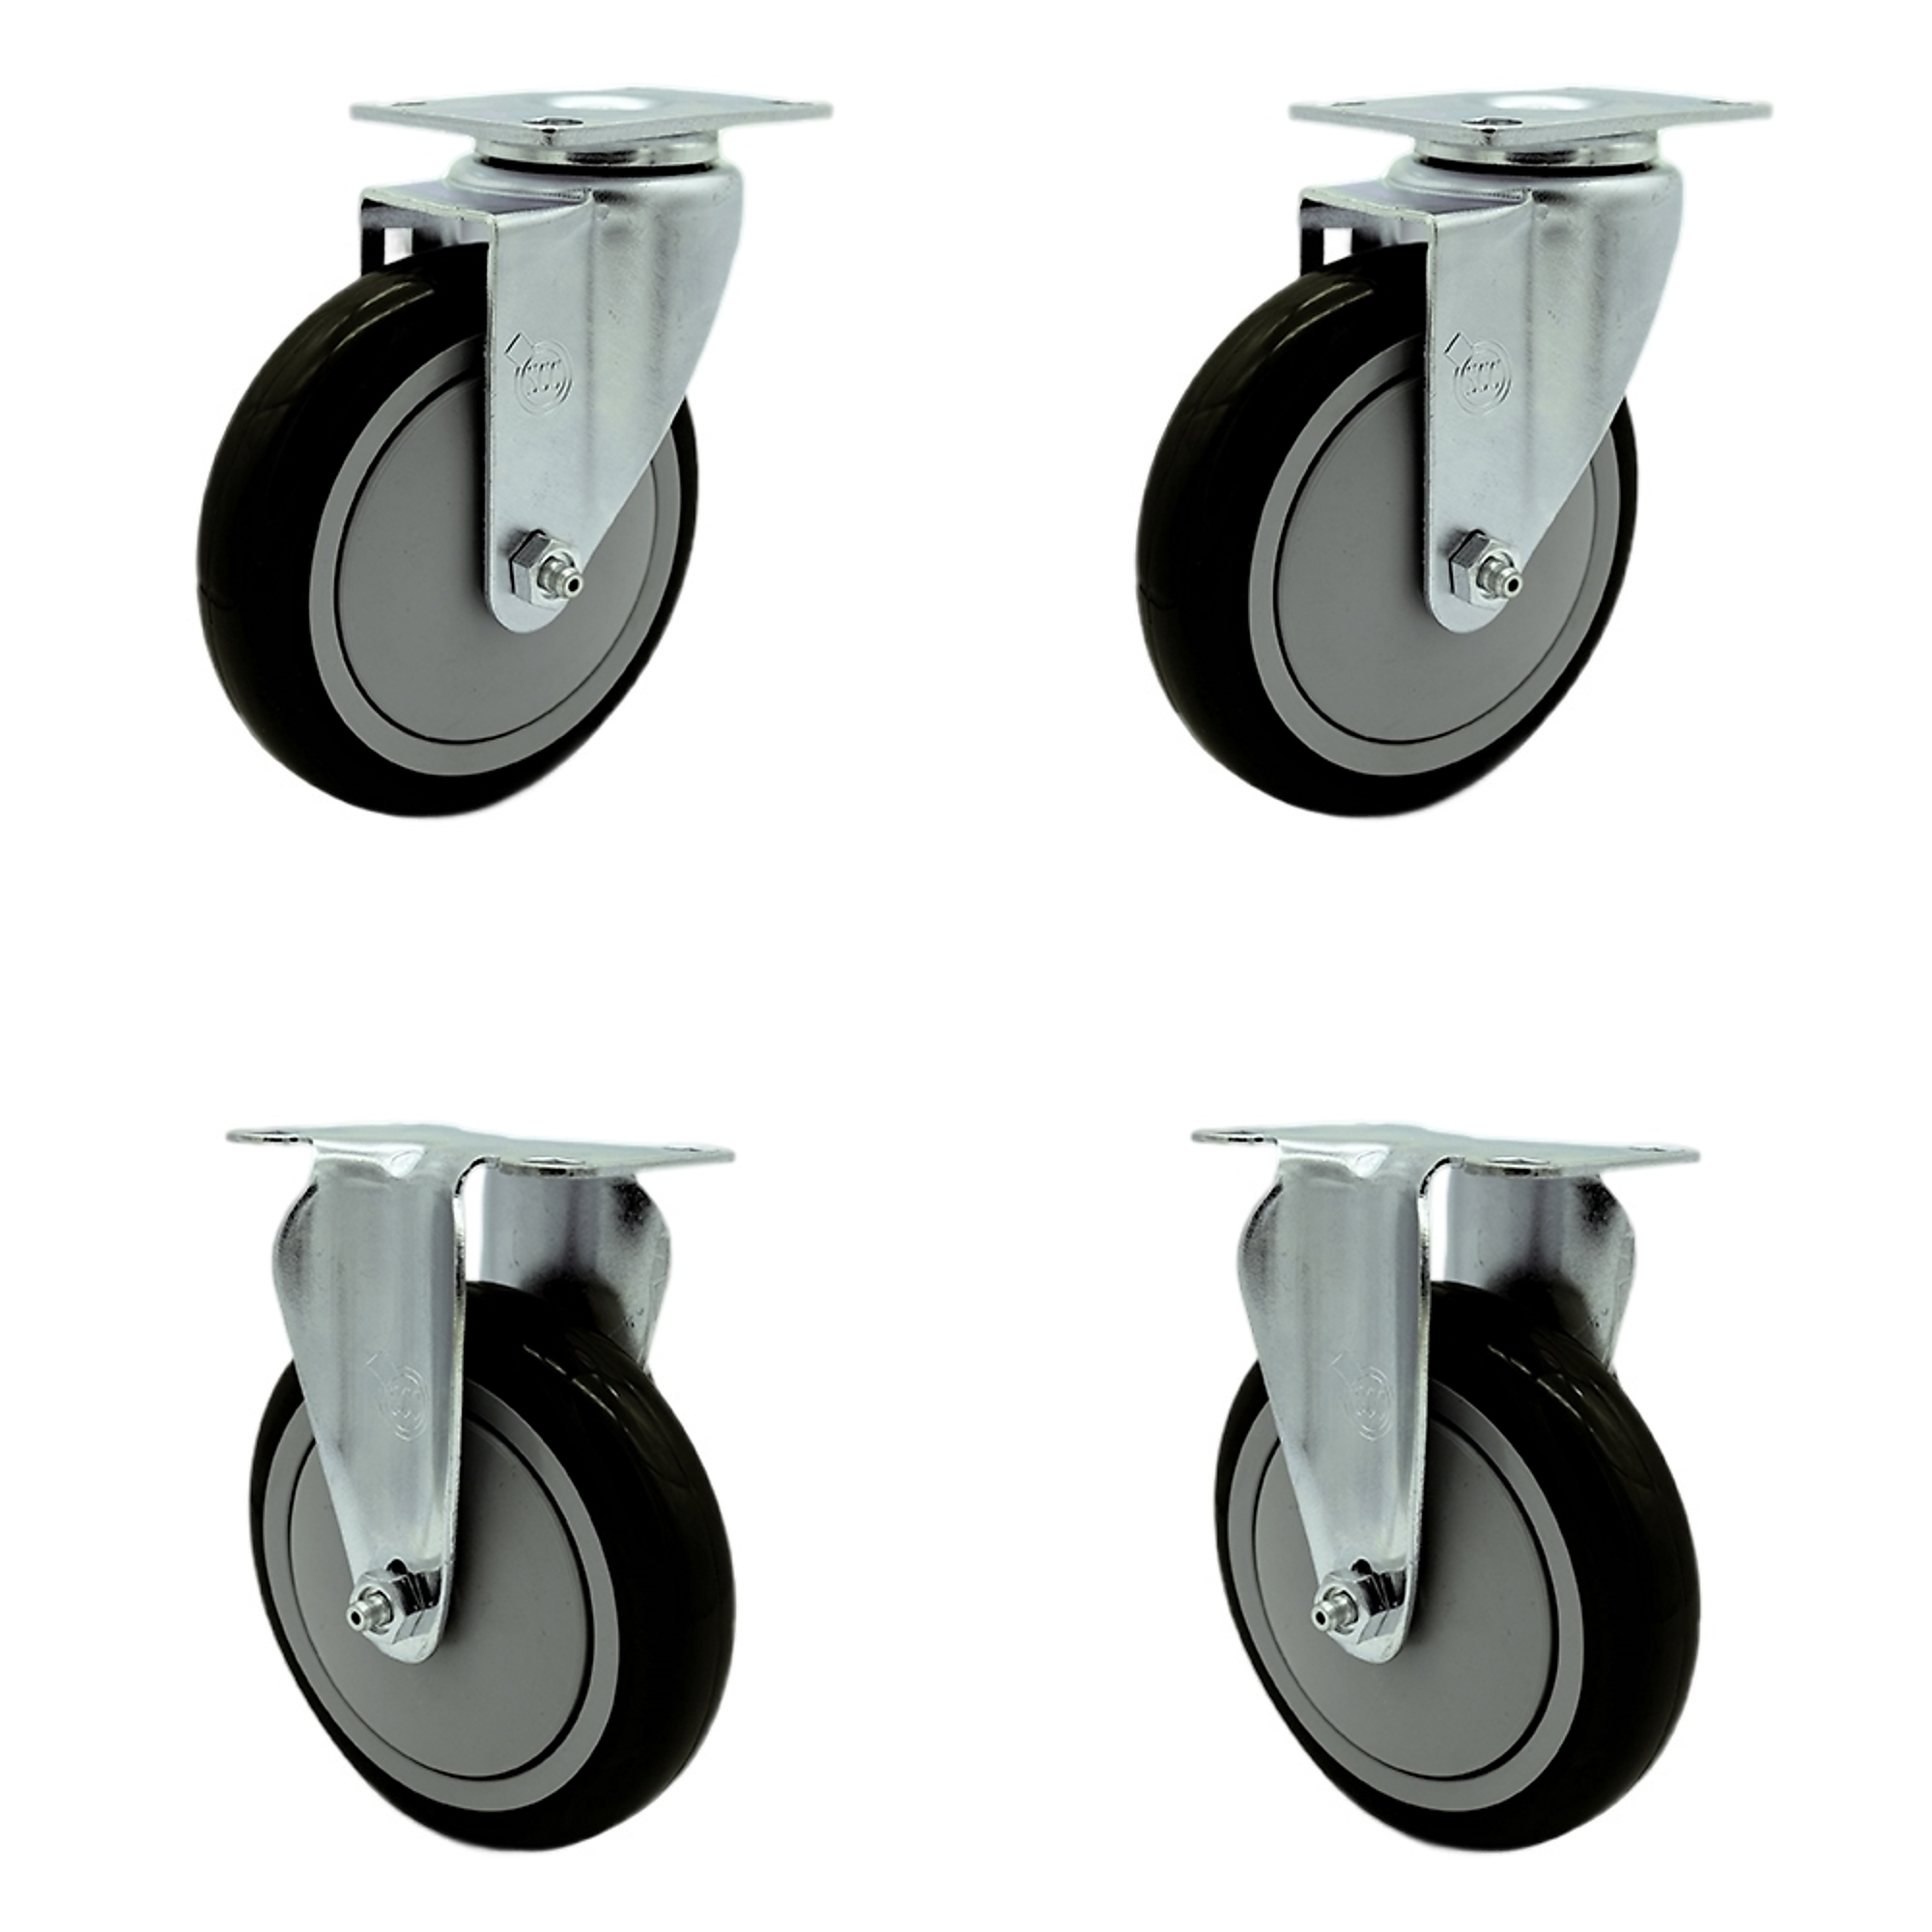 Service Caster, 5Inch x 1 1/4Inch Plate Casters, Wheel Diameter 5 in, Caster Type Swivel, Package (qty.) 4, Model CAM-SCC-20S514-PPUB-BLK-2-R514-2 -  734005058291